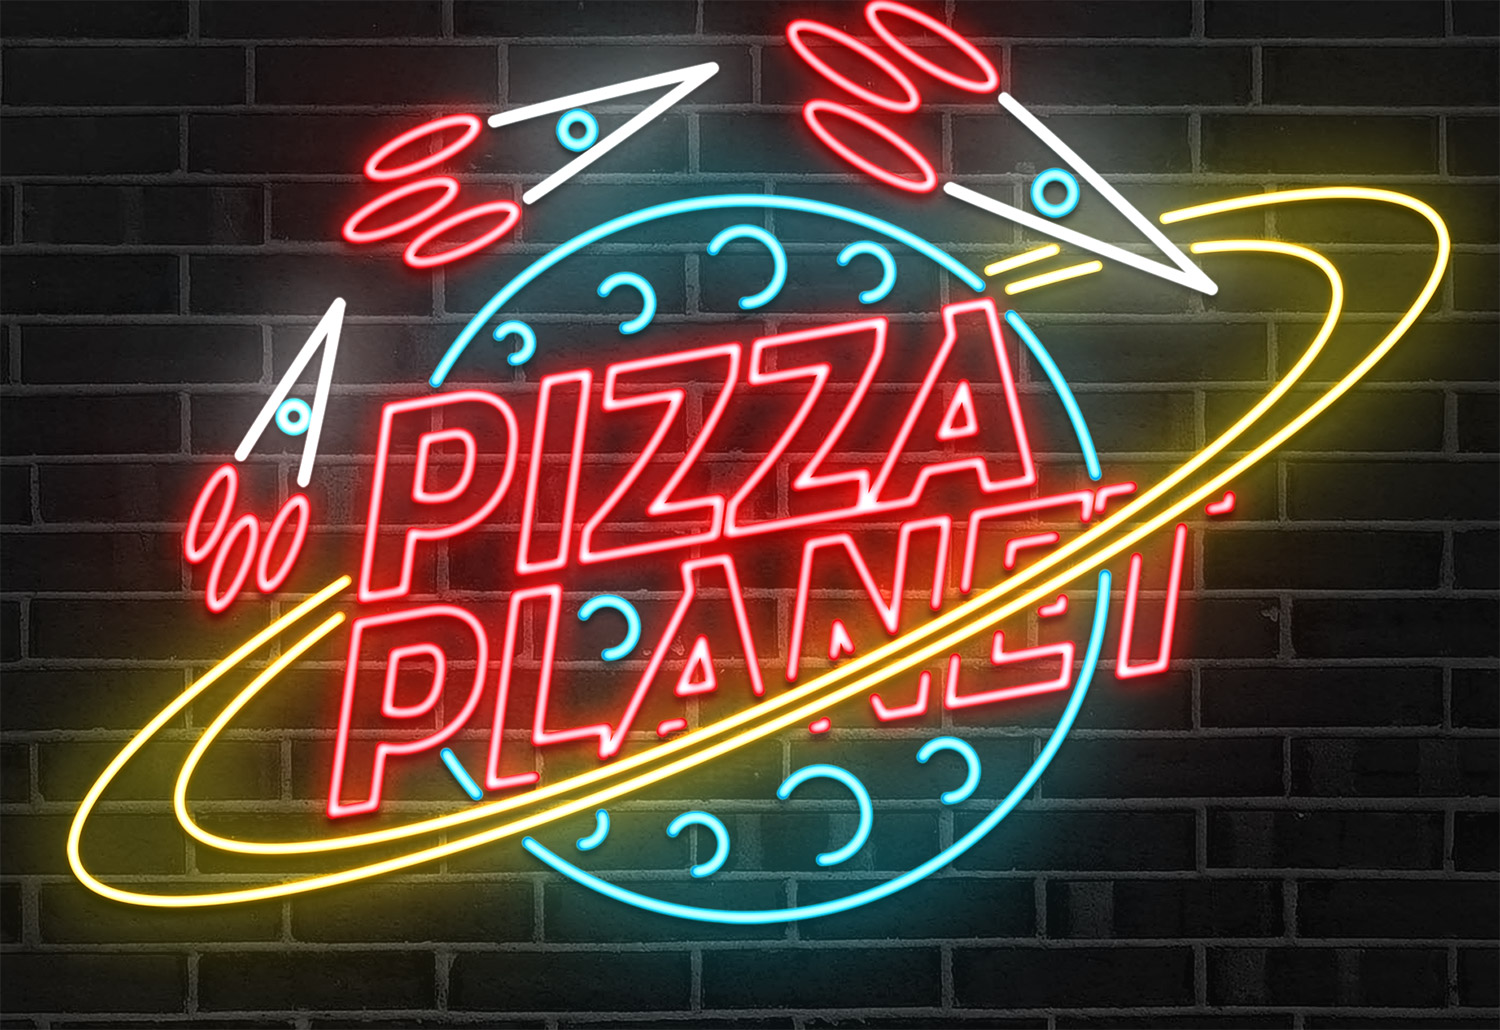 Logisk Distribuere Ulydighed How To Create an Animated Neon Sign Effect